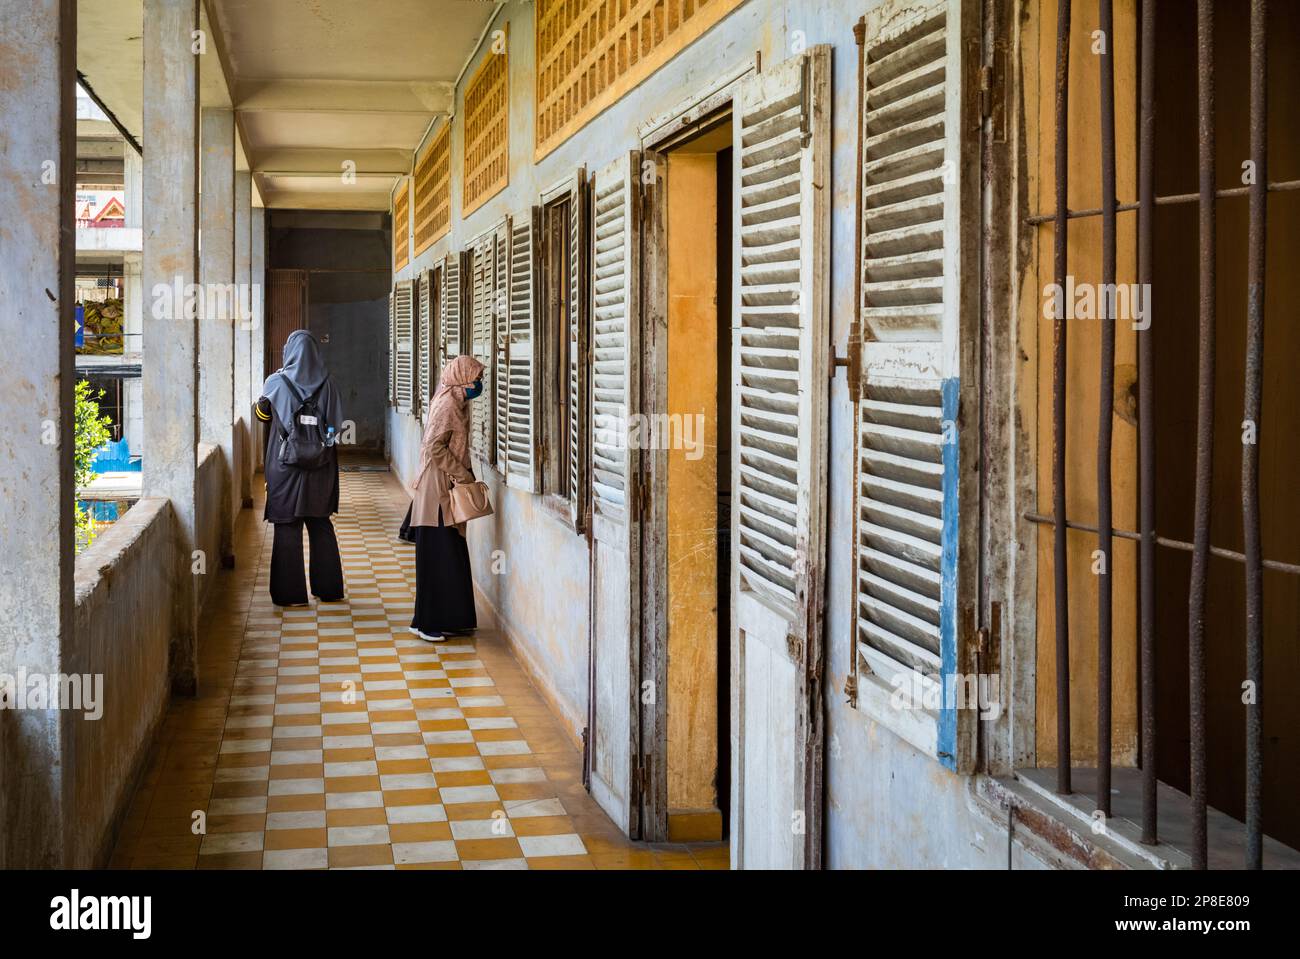 Two Cambodian muslim women look at former classrooms in the notorious Tuol Sleng S-21 torture and genocide prison museum in Phnom Penh, Cambodia. Stock Photo